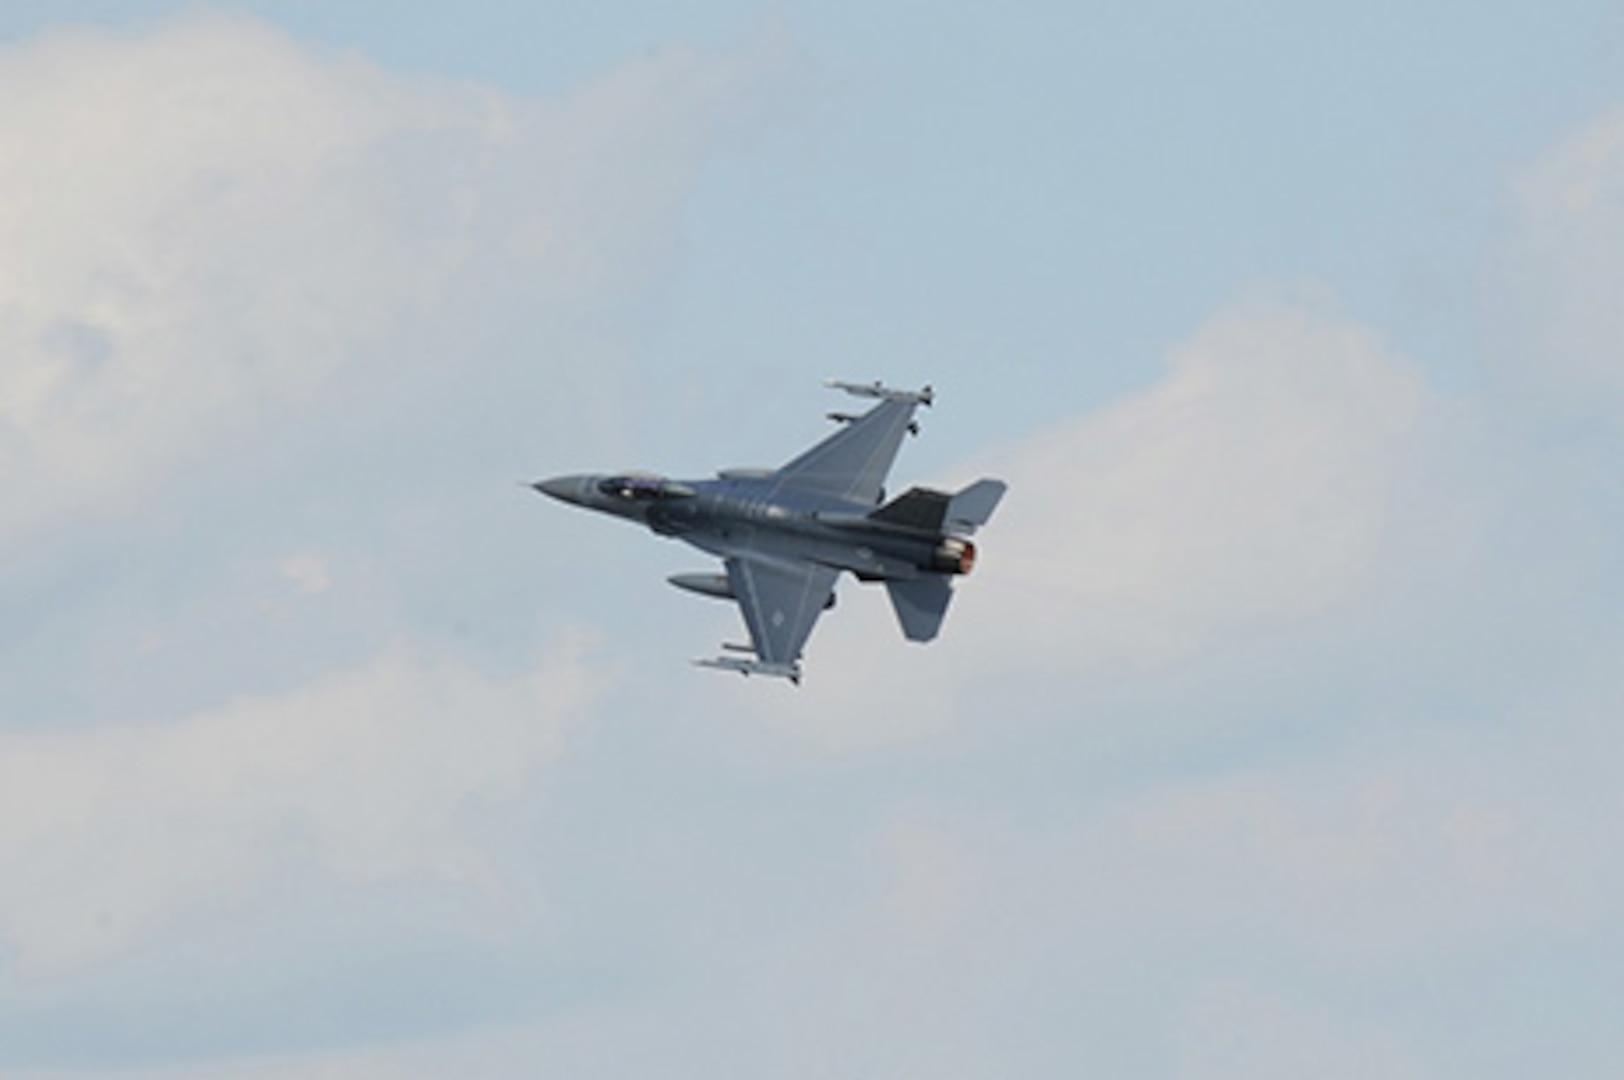 A U.S. F-16 Fighting Falcon aircraft from the 140th Wing, Colorado Air National Guard, is in flight over Pápa Air Base, Pápa, Hungary in support of Operation Panther Strike after returning from a training mission in eastern Europe, July 19, 2016. In conjunction with Operation Atlantic Resolve, the 140th Wing, Colorado Air National Guard from Buckley Air Force Base, Colorado, has deployed approximately 200 Airmen to Pápa Air Base, Hungary, to conduct familiarization training alongside our NATO ally, Hungary. They will also participate in cross-border training with other deployed U.S. forces' aircraft and NATO aircraft in the region. This deployment continues to demonstrate our commitment to our allies and European security and stability. (U.S. Air National Guard photo by Senior Master Sgt. John Rohrer)